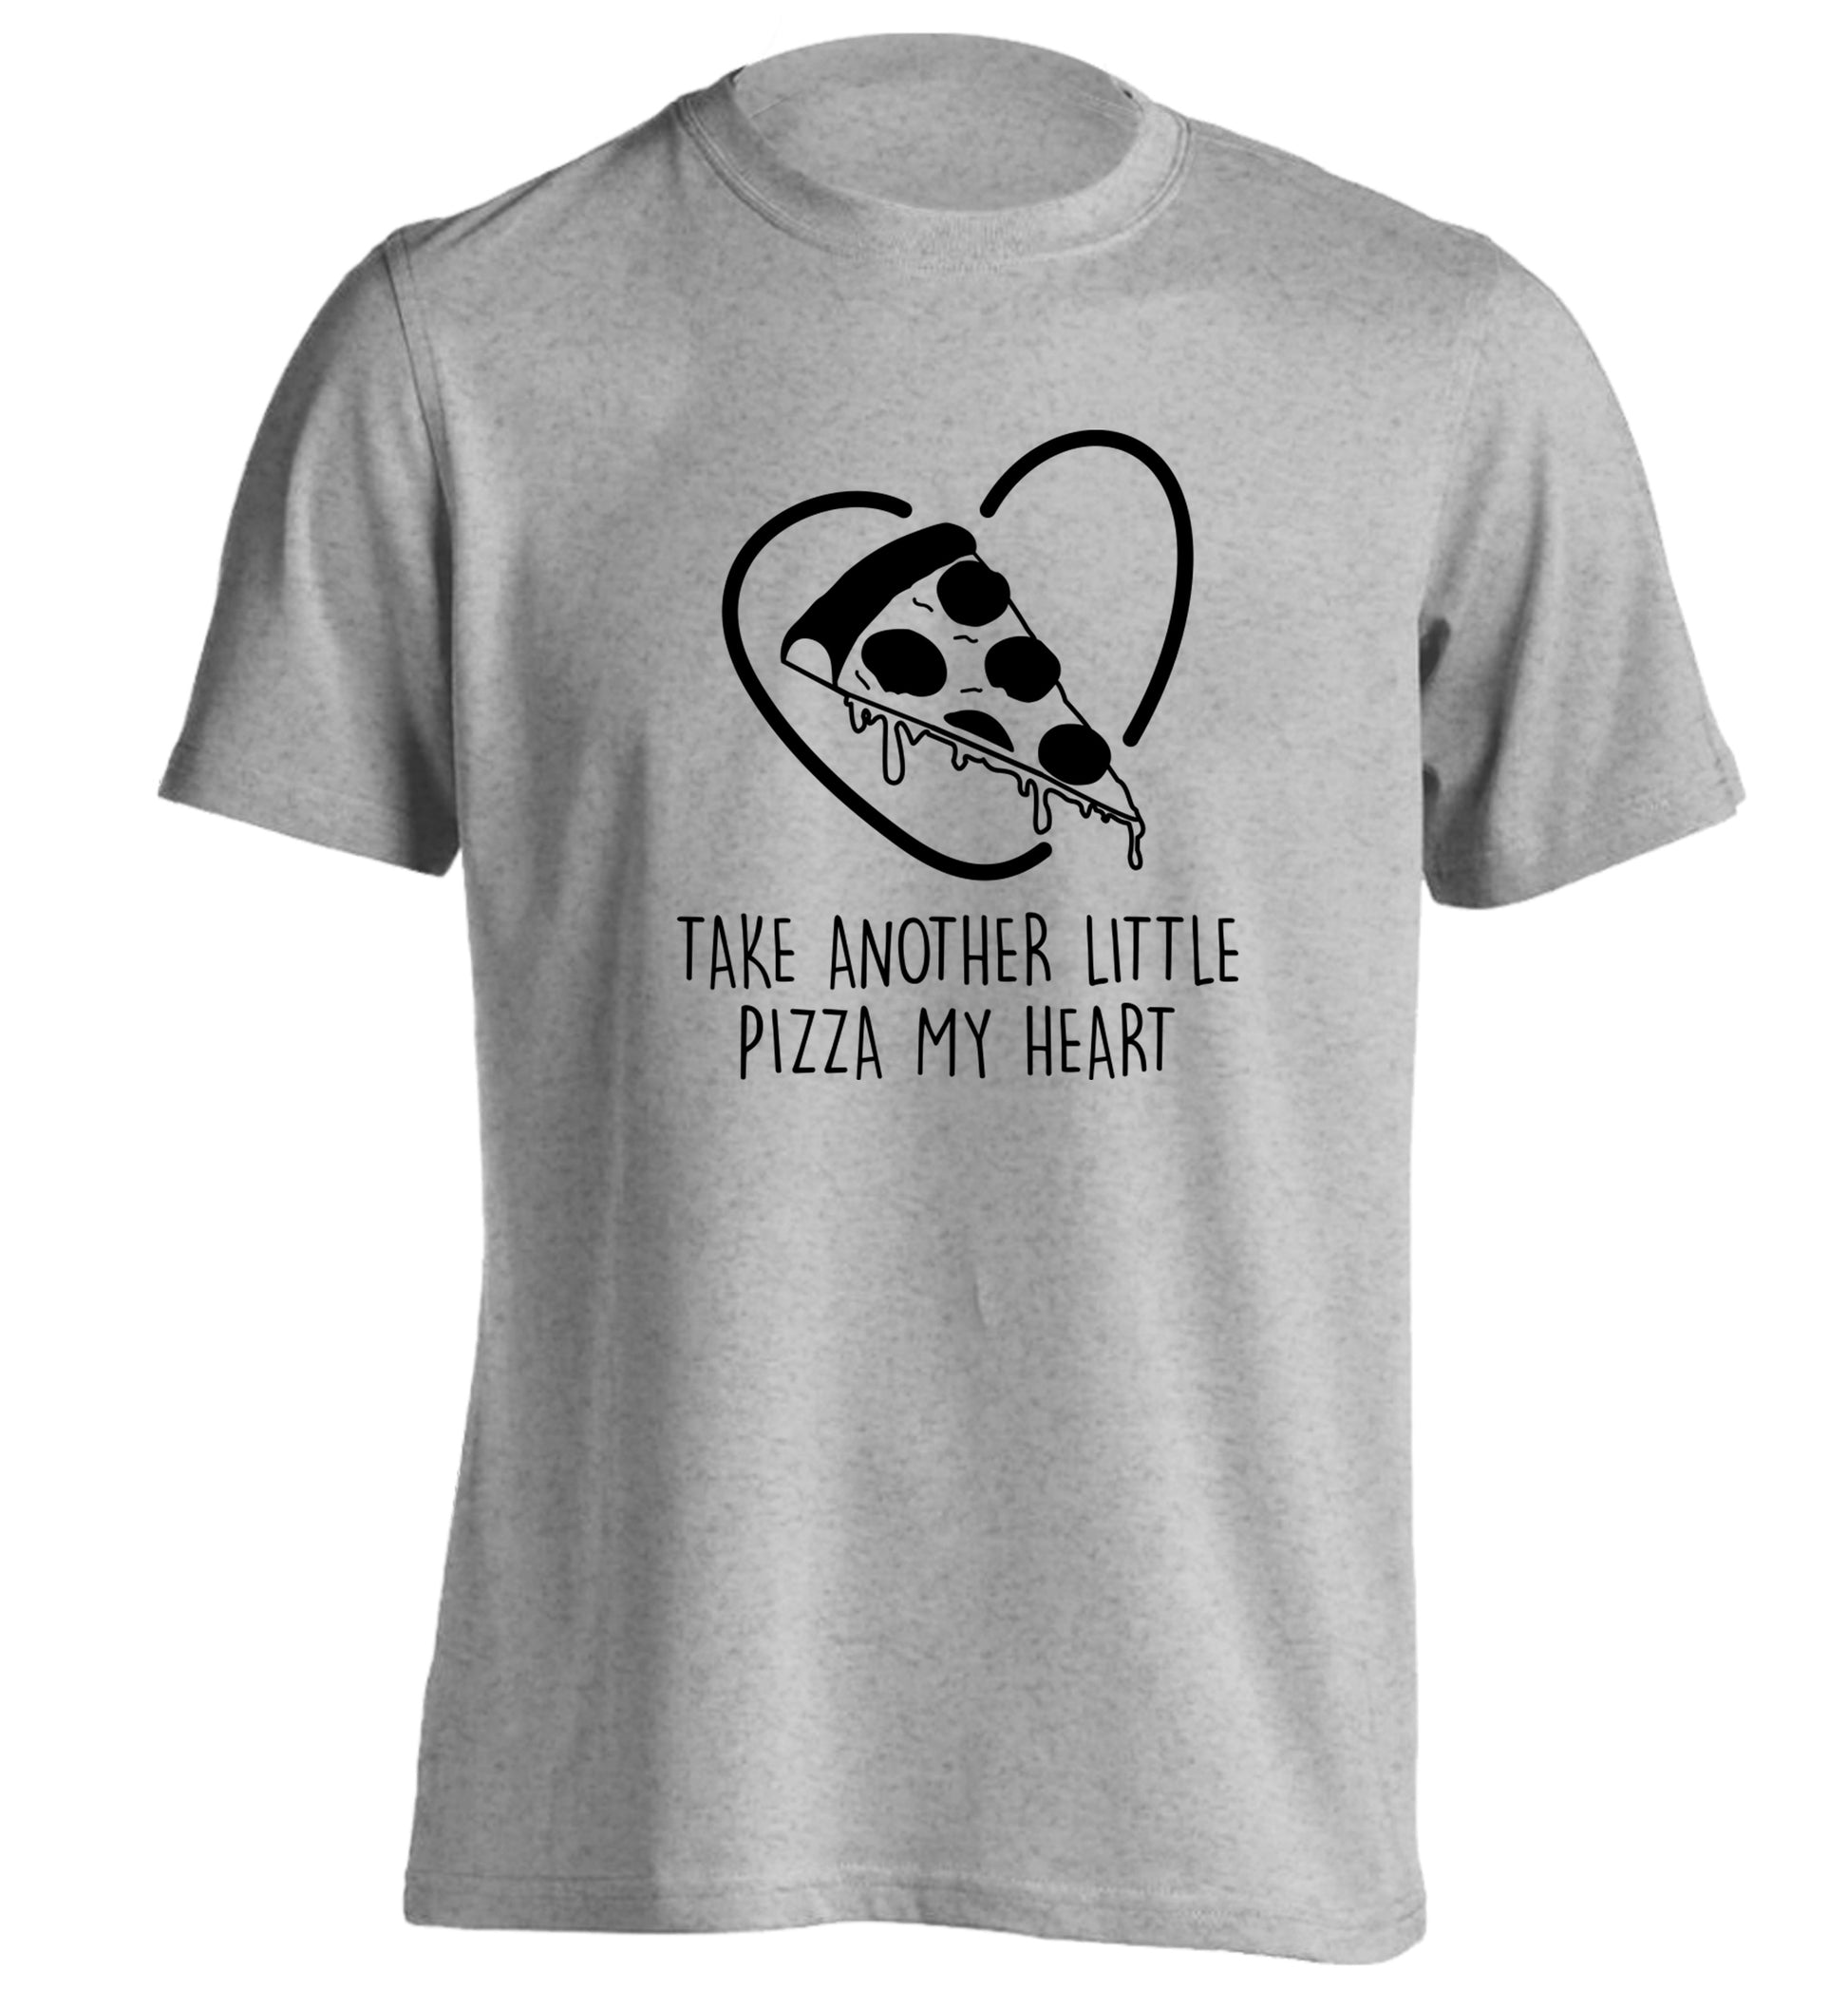 Take another little pizza my heart adults unisex grey Tshirt 2XL